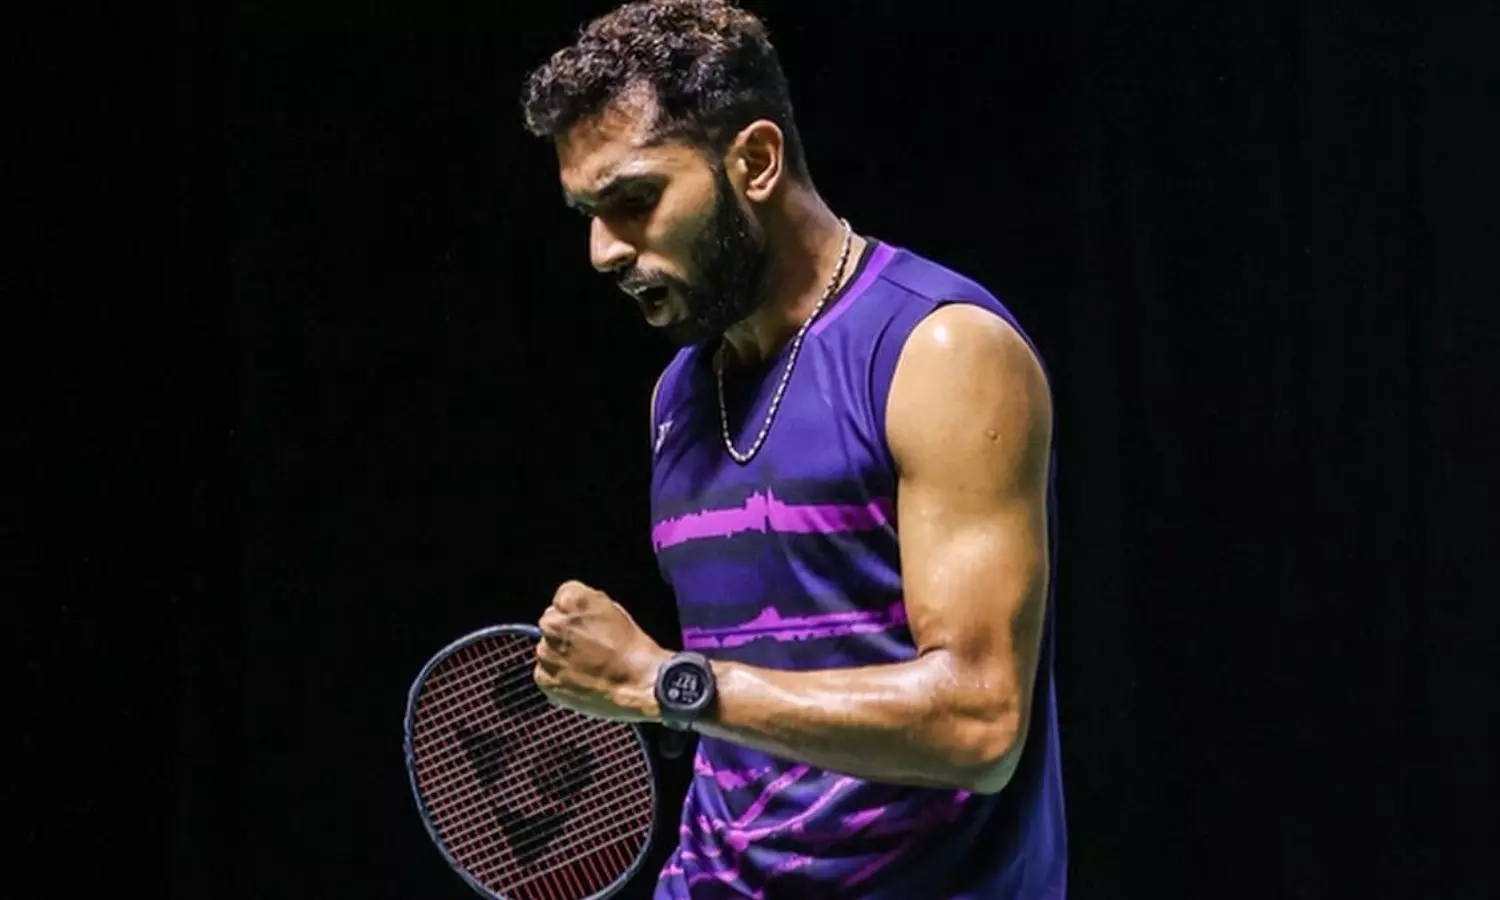 HS Prannoy hands Olympic champion Viktor Axelsen his first loss since March 2021